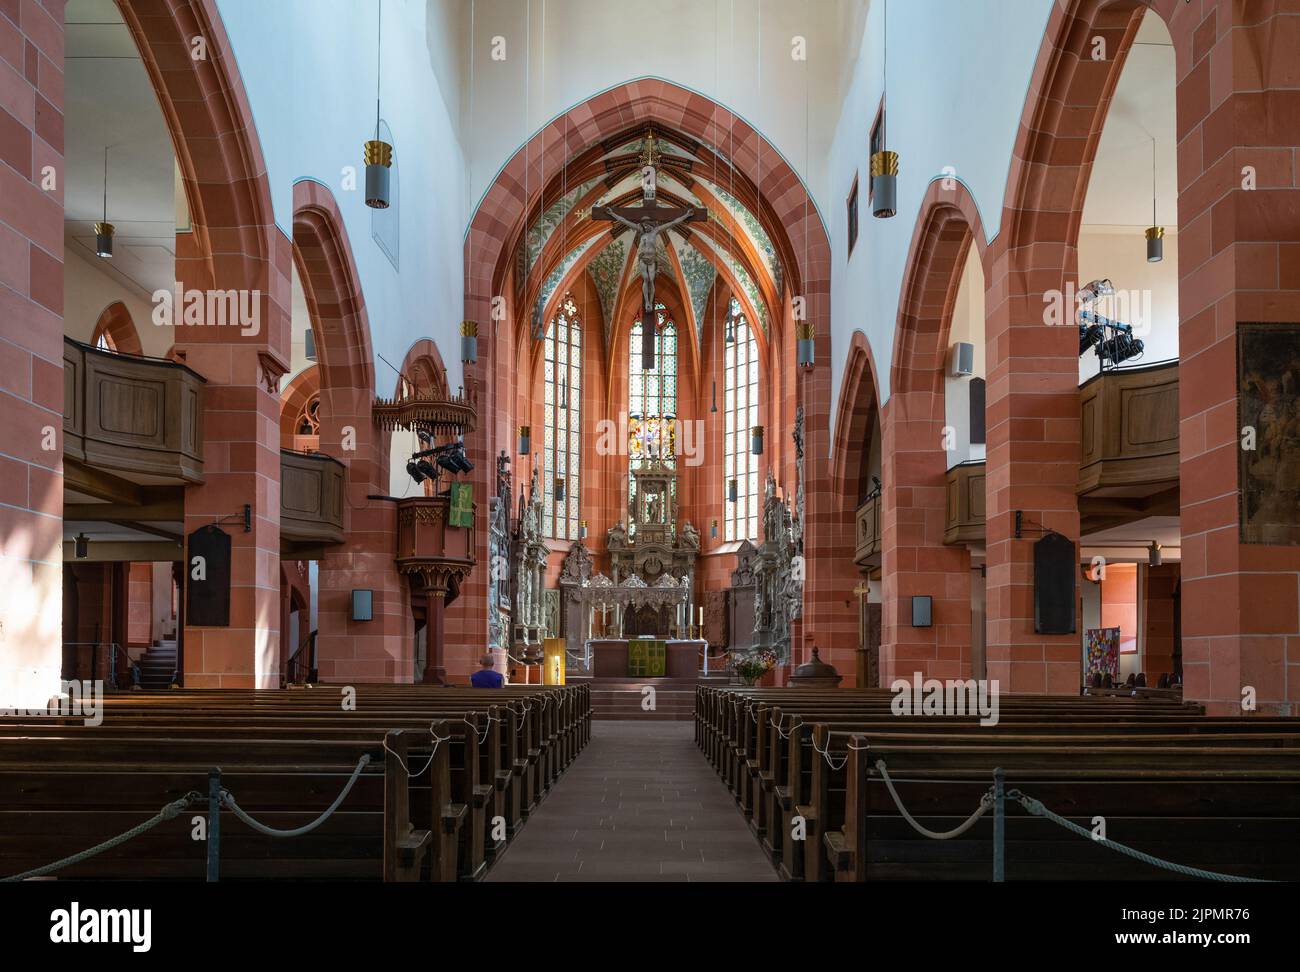 Wertheim, Germany - July 19, 2021: The nave and the altar of the Collegiate church Stock Photo